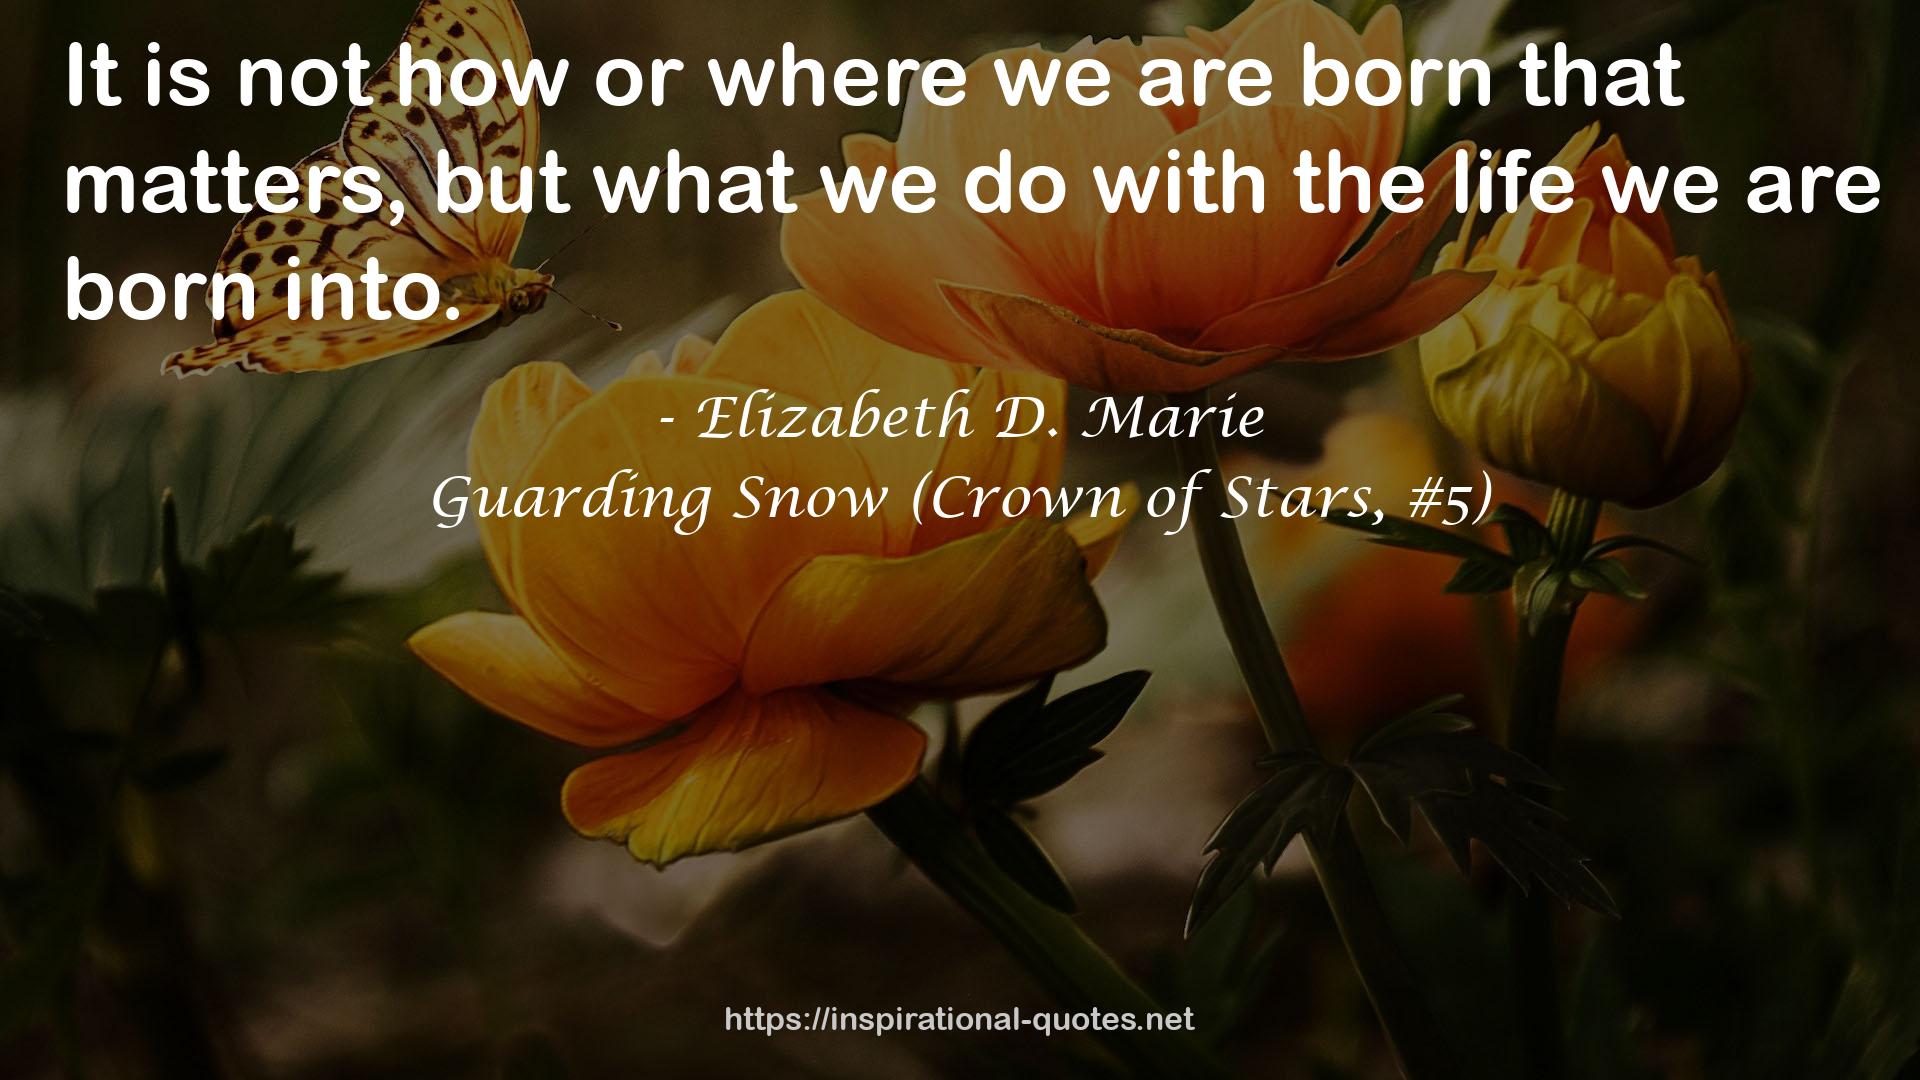 Guarding Snow (Crown of Stars, #5) QUOTES